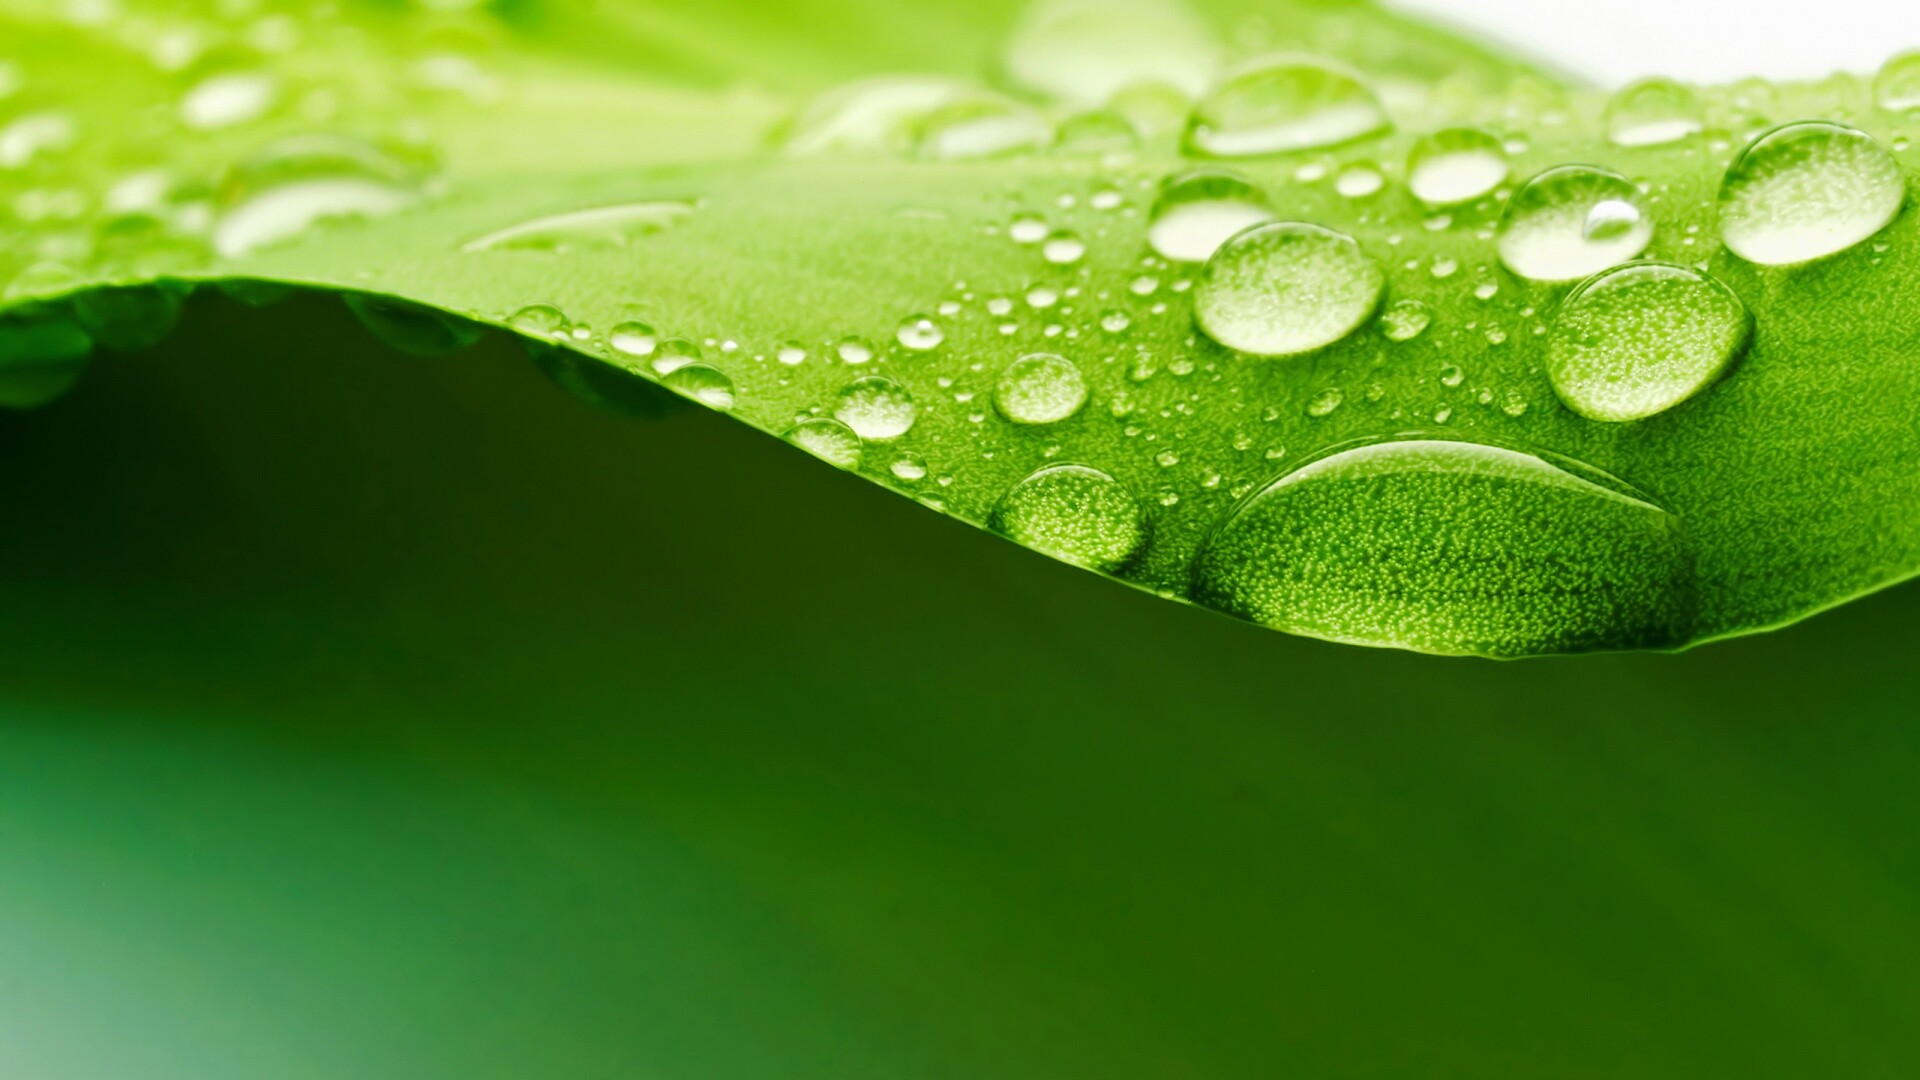 Leaf: The main lateral organ of the upper part of the plant. 1920x1080 Full HD Wallpaper.